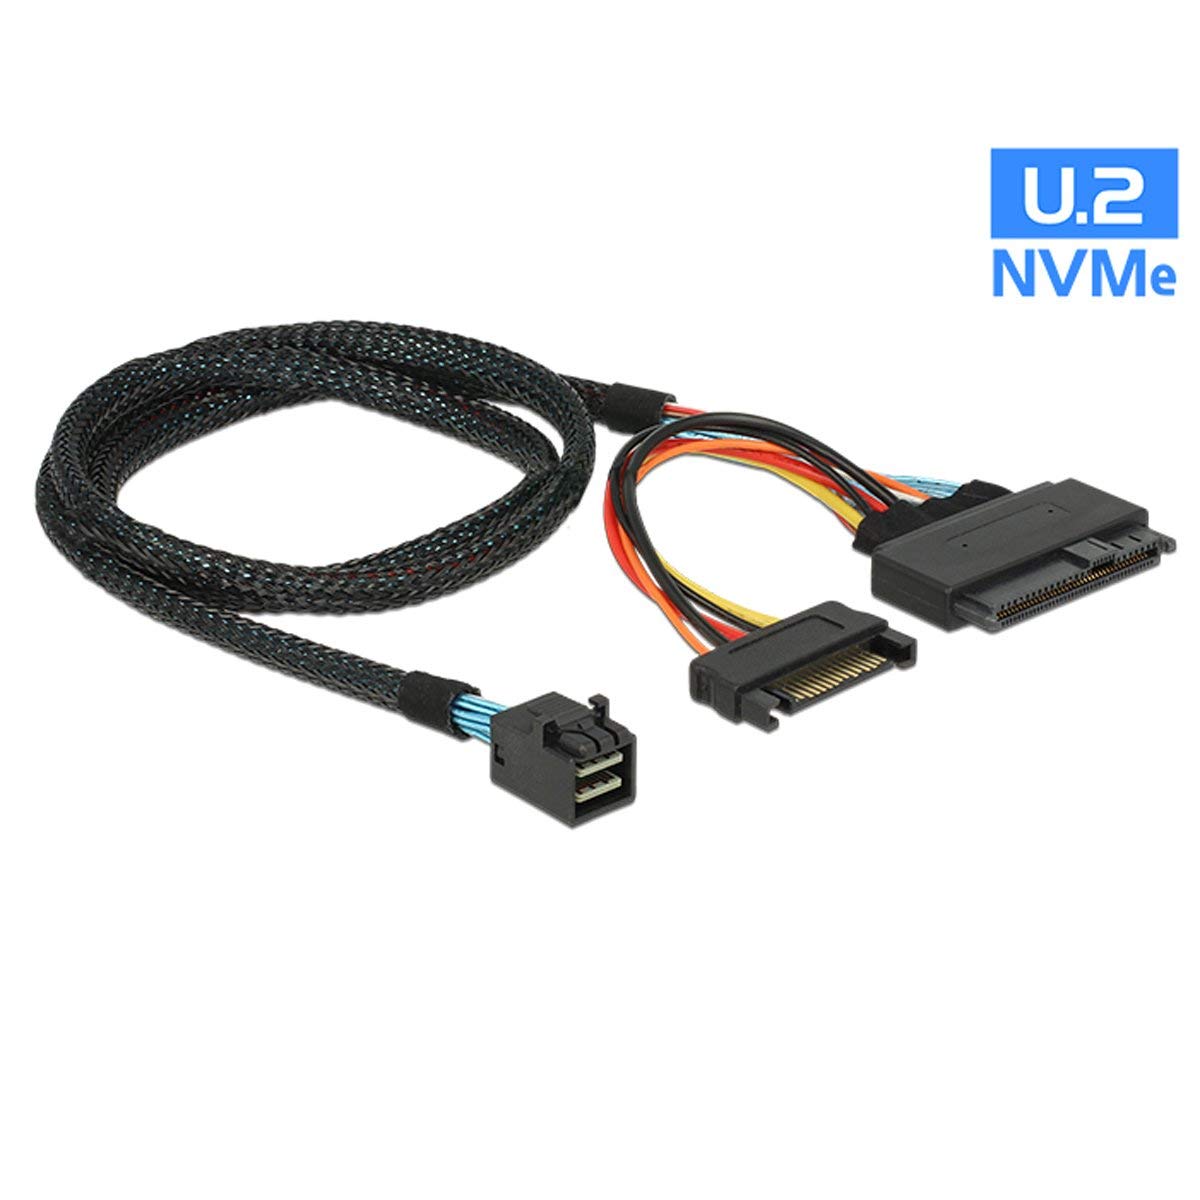 CableDeconn Internal 12G Mini SAS HD to U.2 / SFF-8643 to SFF-8639 Cable 0.5m with 15Pin SATA Power for U.2 SSD H0108